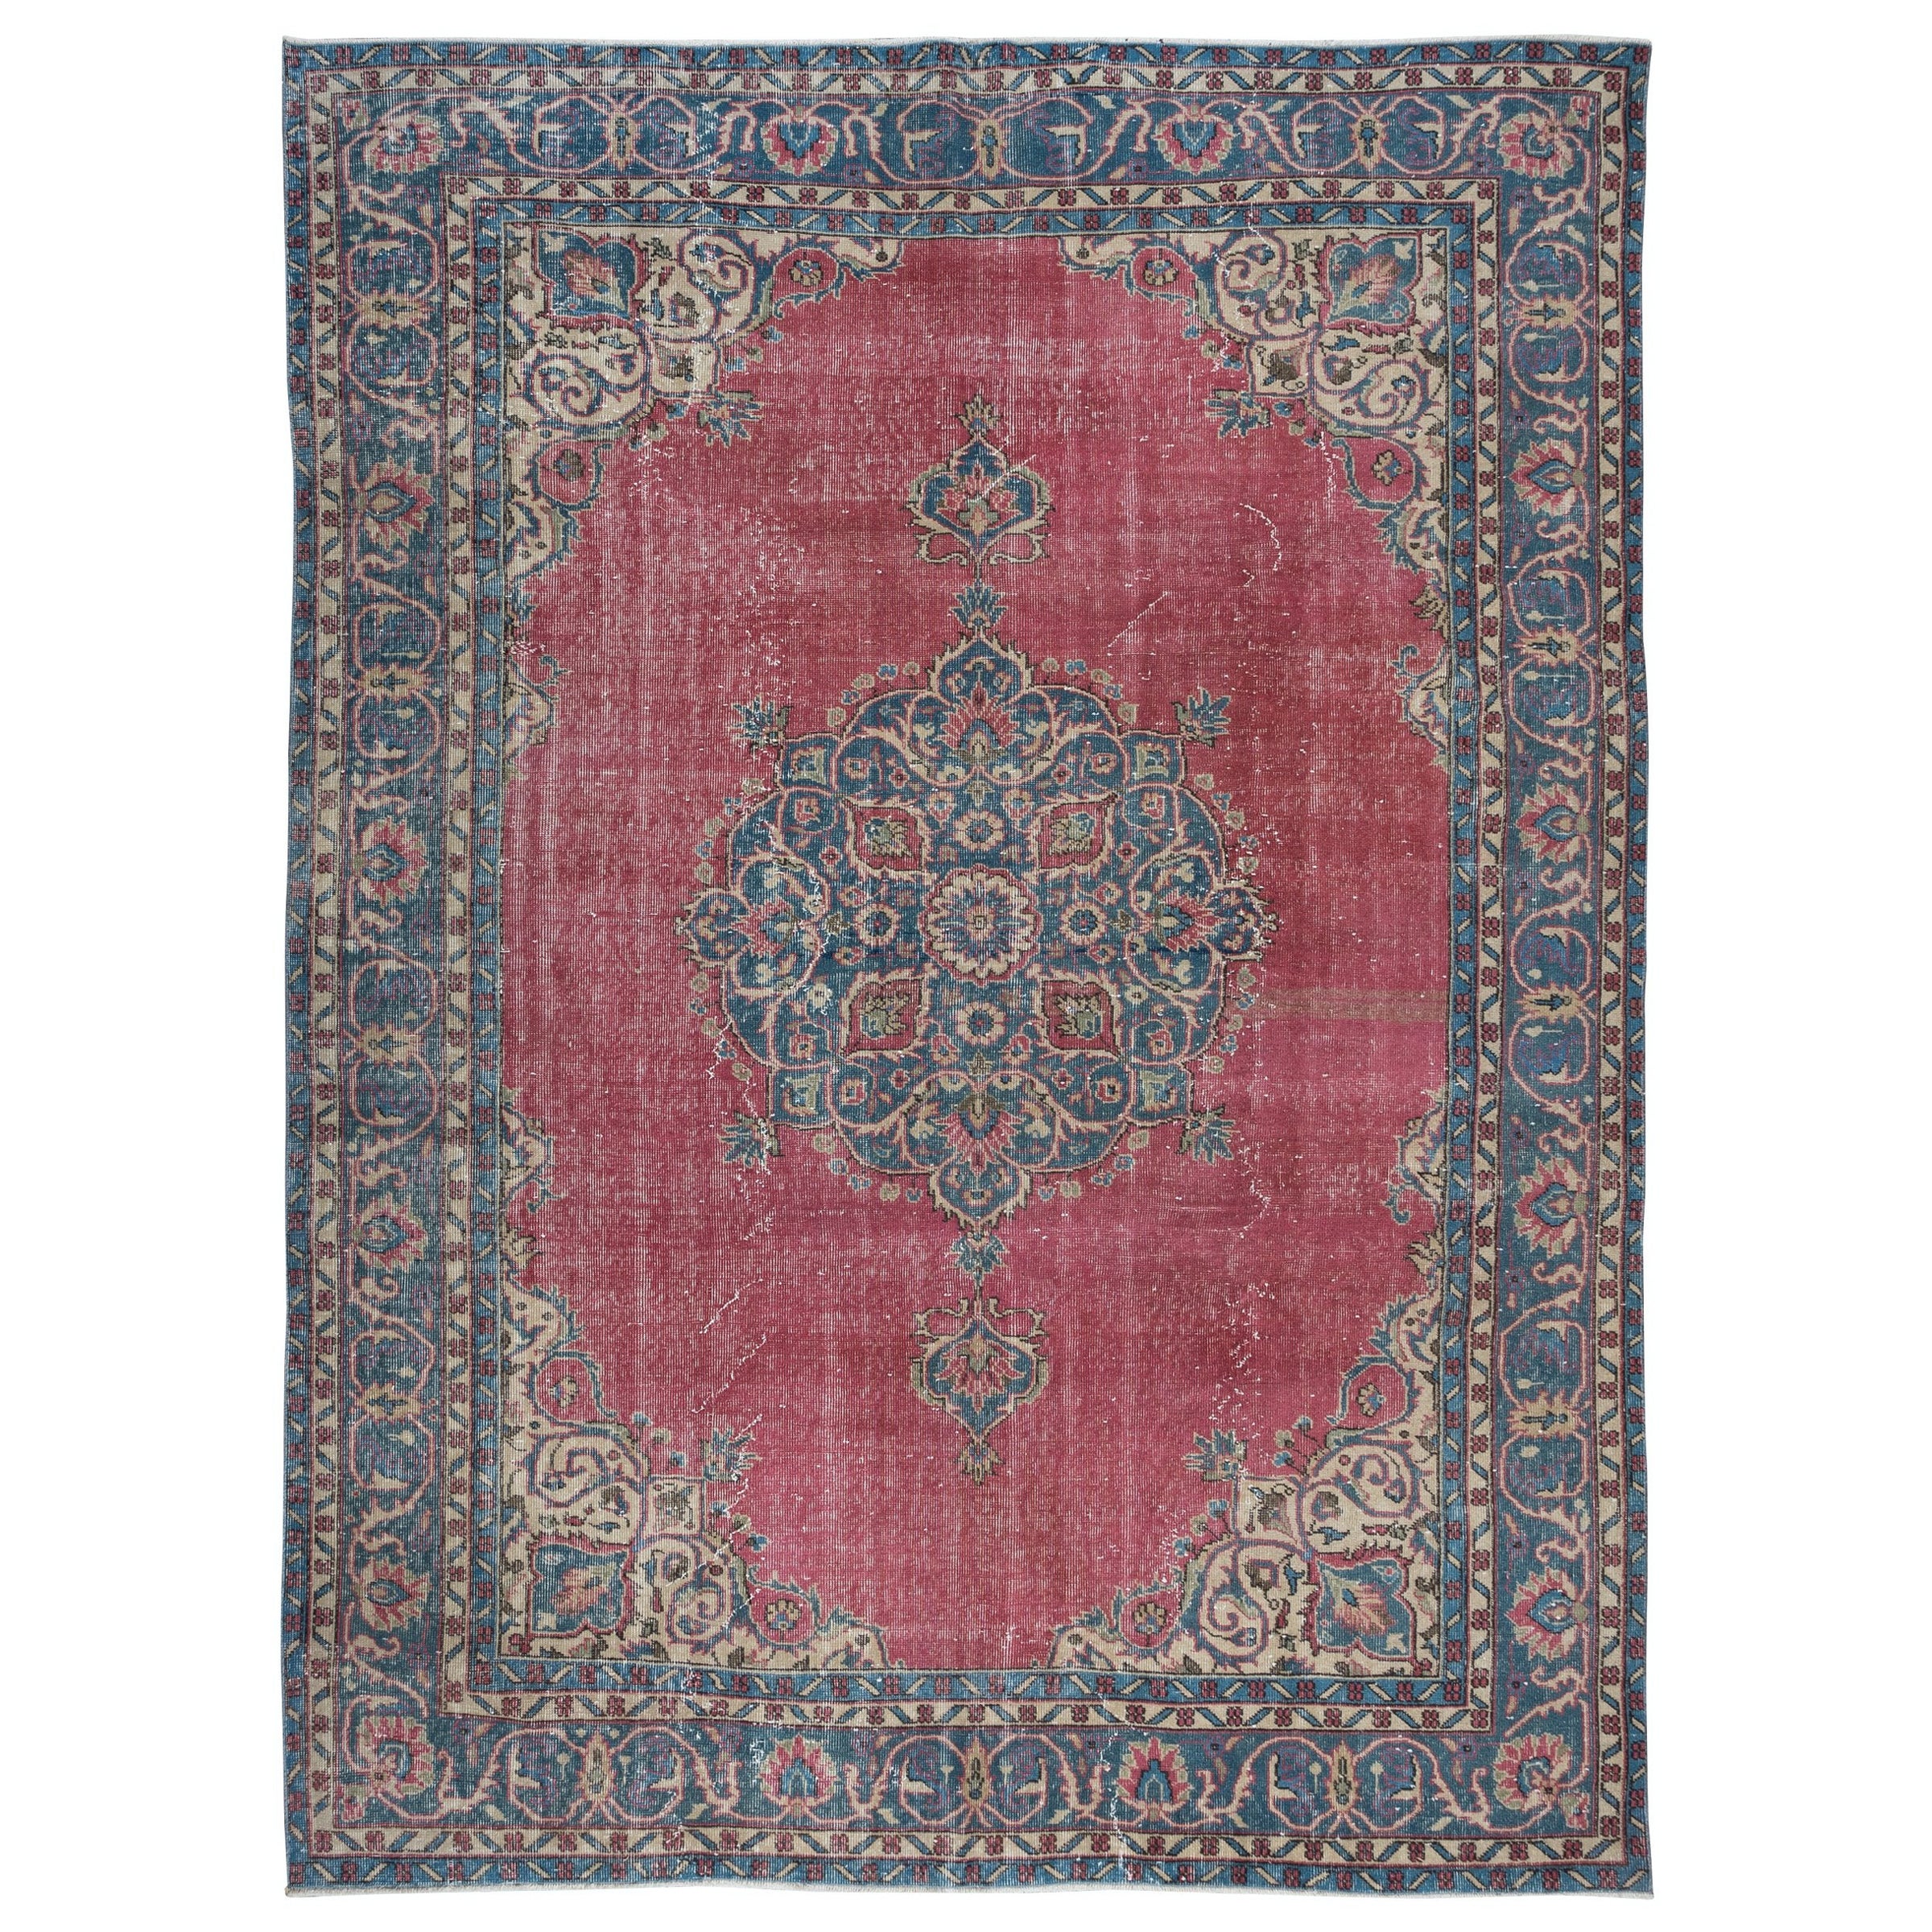 7.8x10.5 Ft One of a kind Handmade Vintage Anatolian Area Rug in Red & Dark Blue